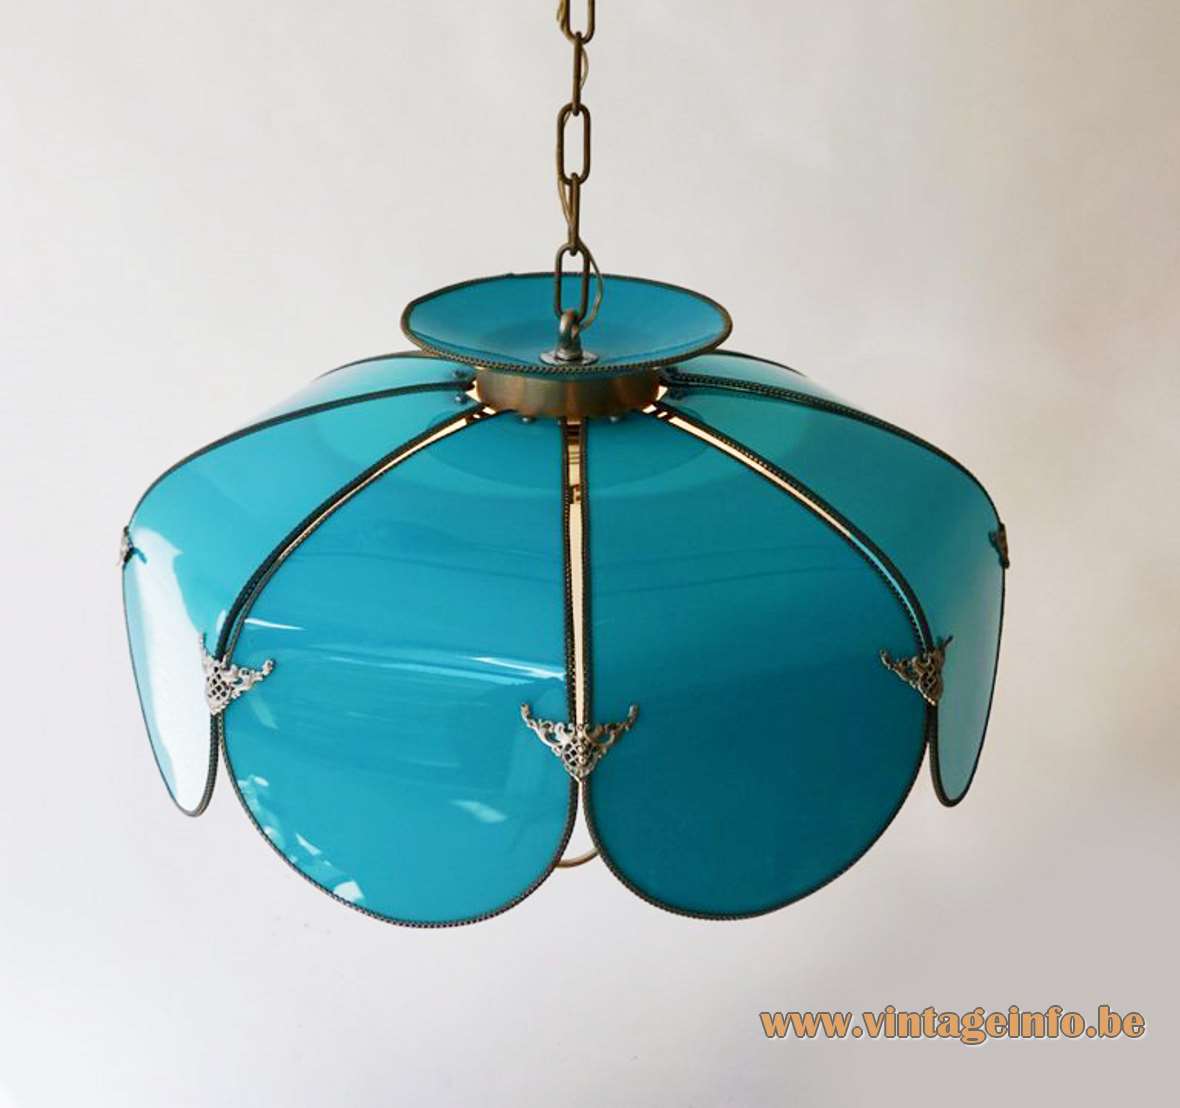 Lotus flower pendant lamp blue petals white acrylic lampshade brass chain 1960s 1950s USA swag MCM